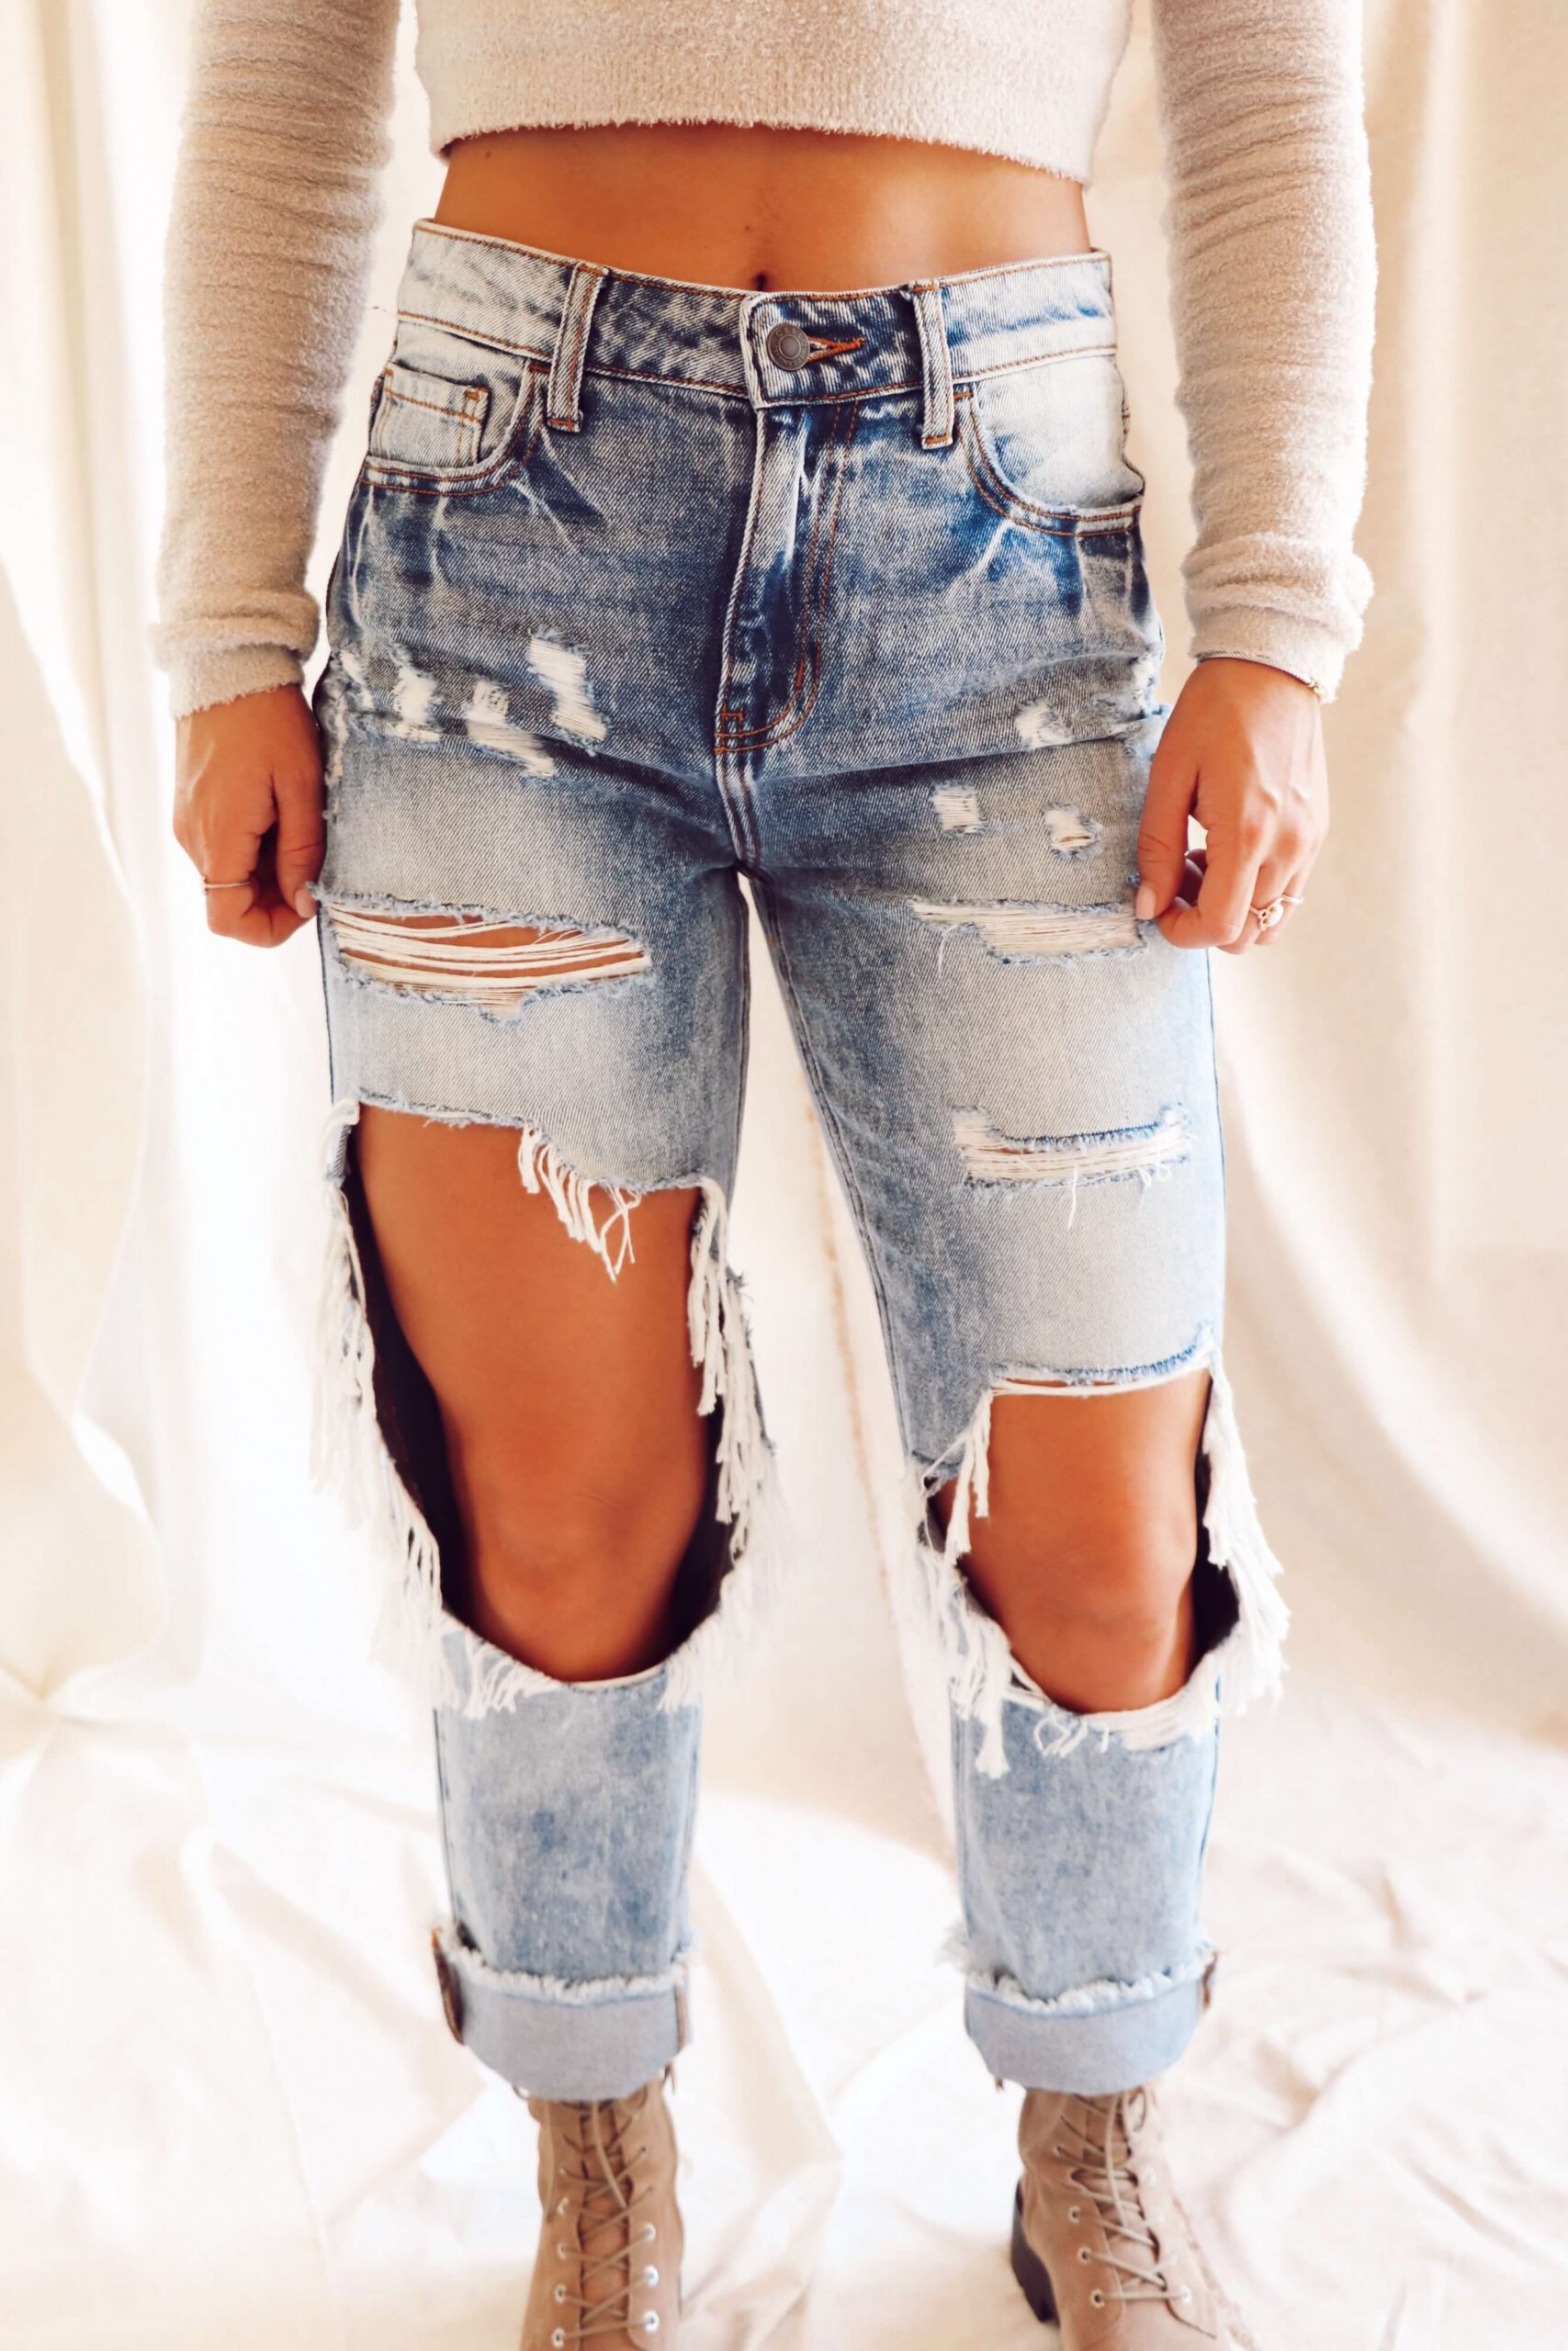 High Quality ripped jeans Blank Meme Template